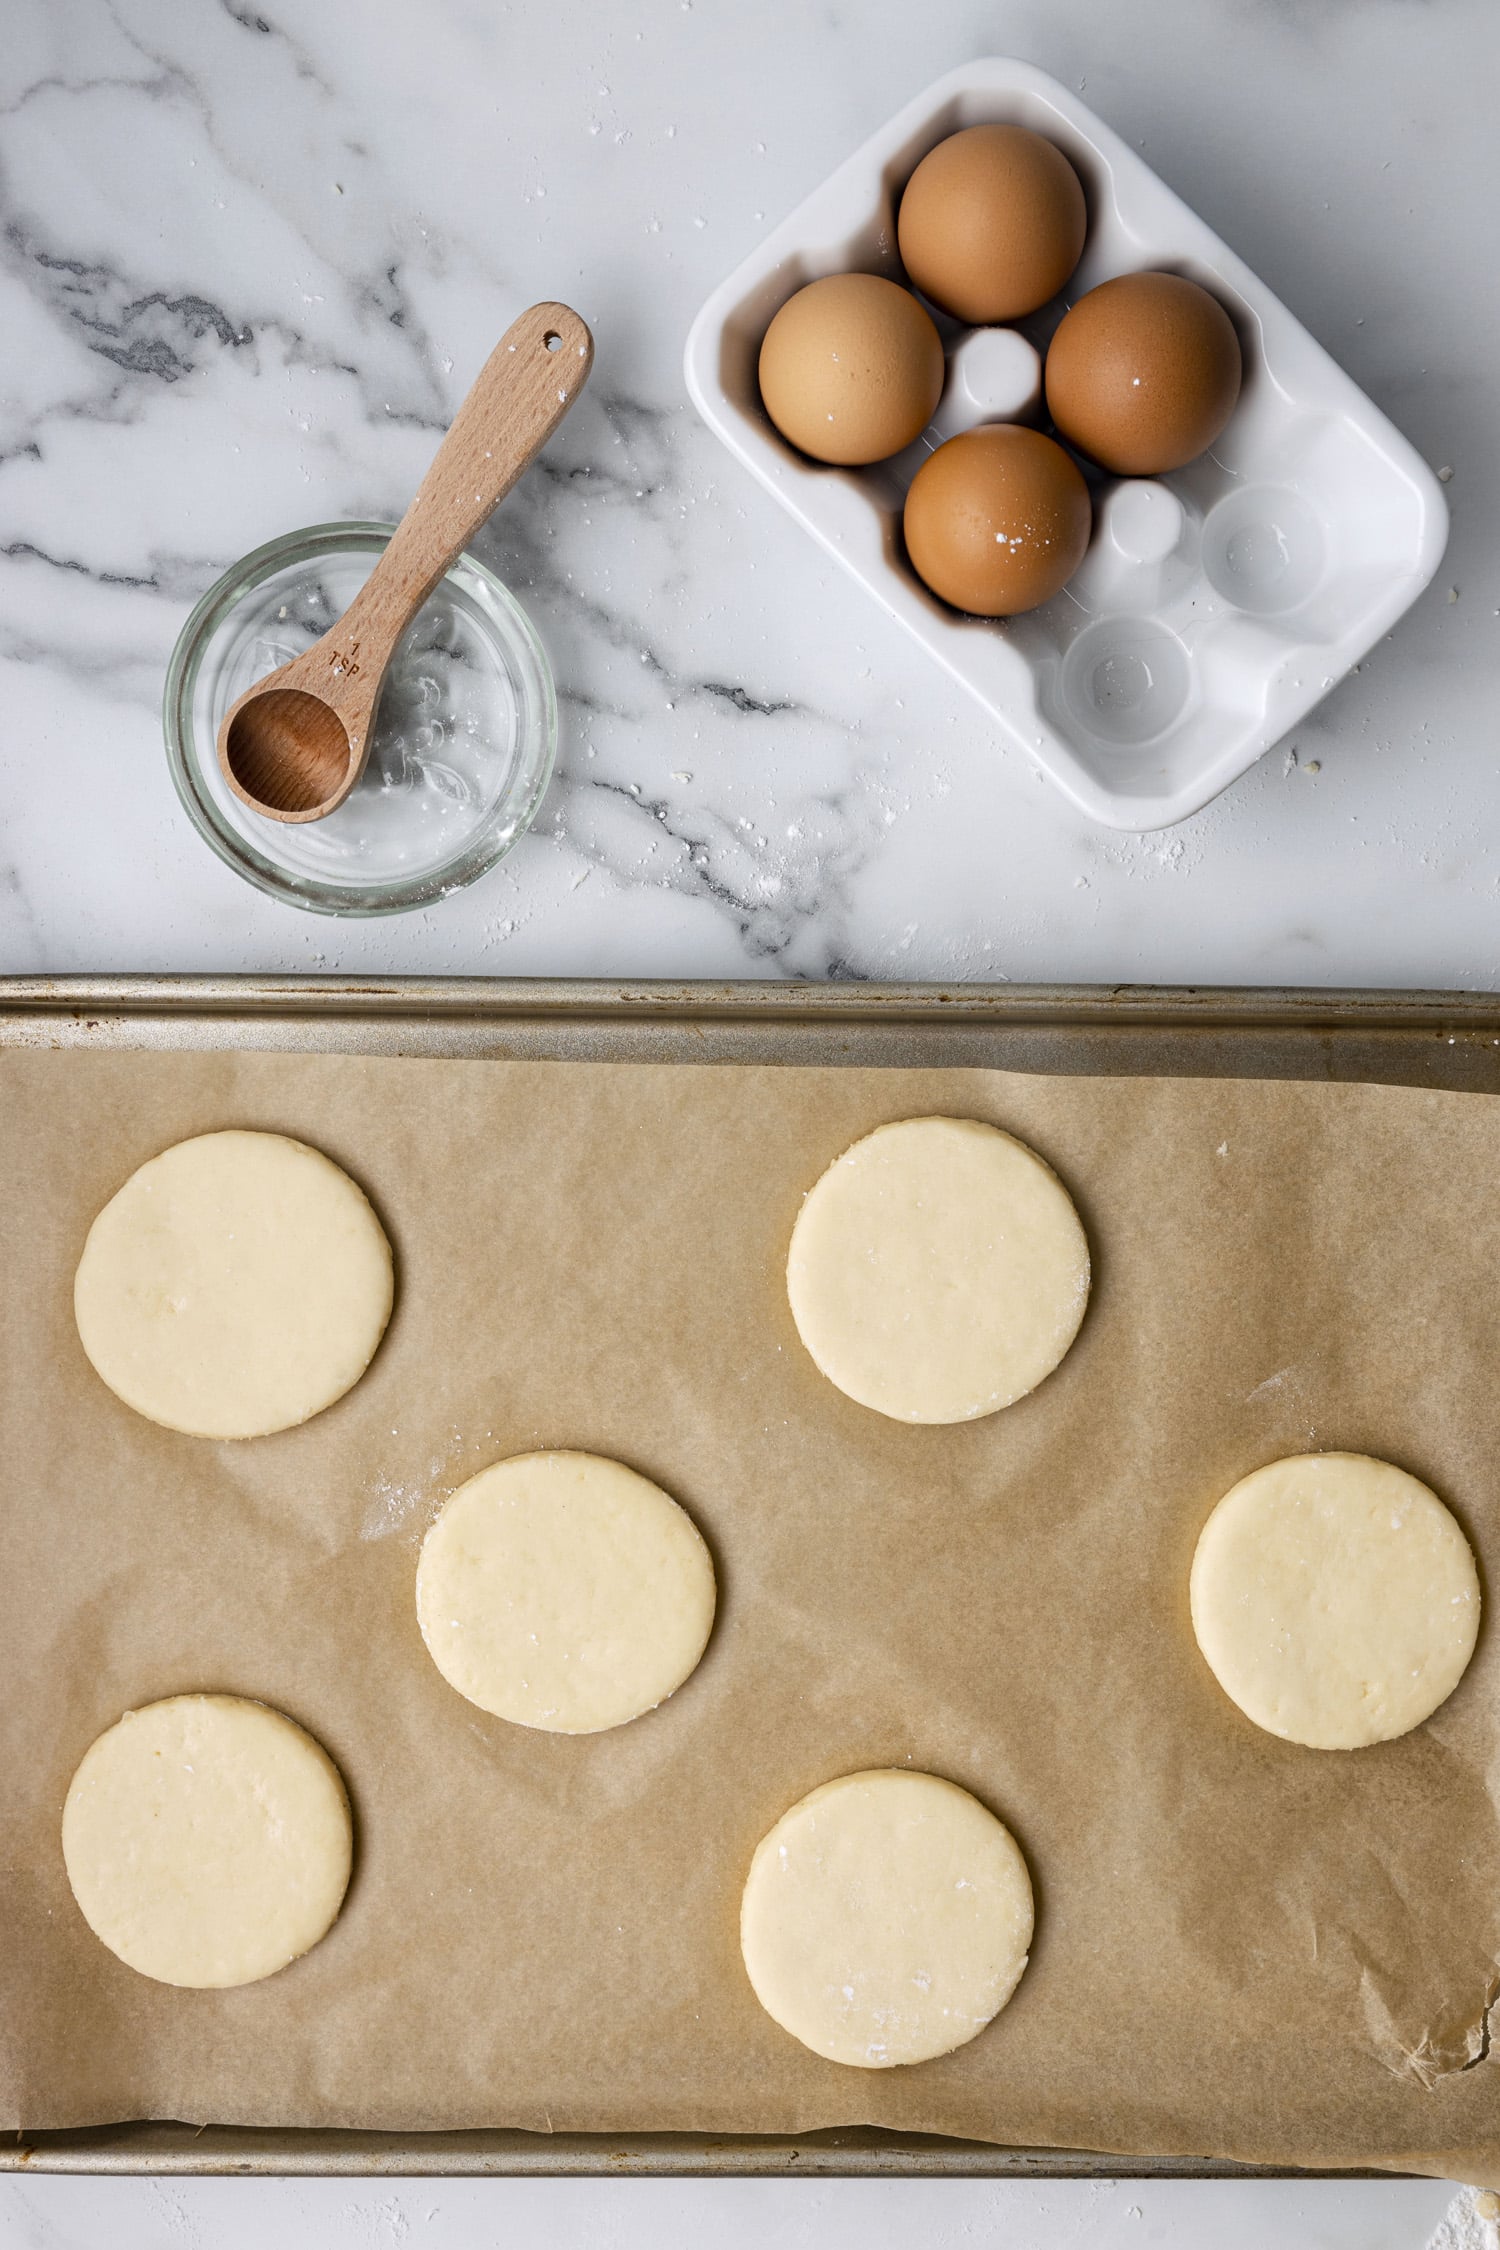 Round cookies placed on parchment paper